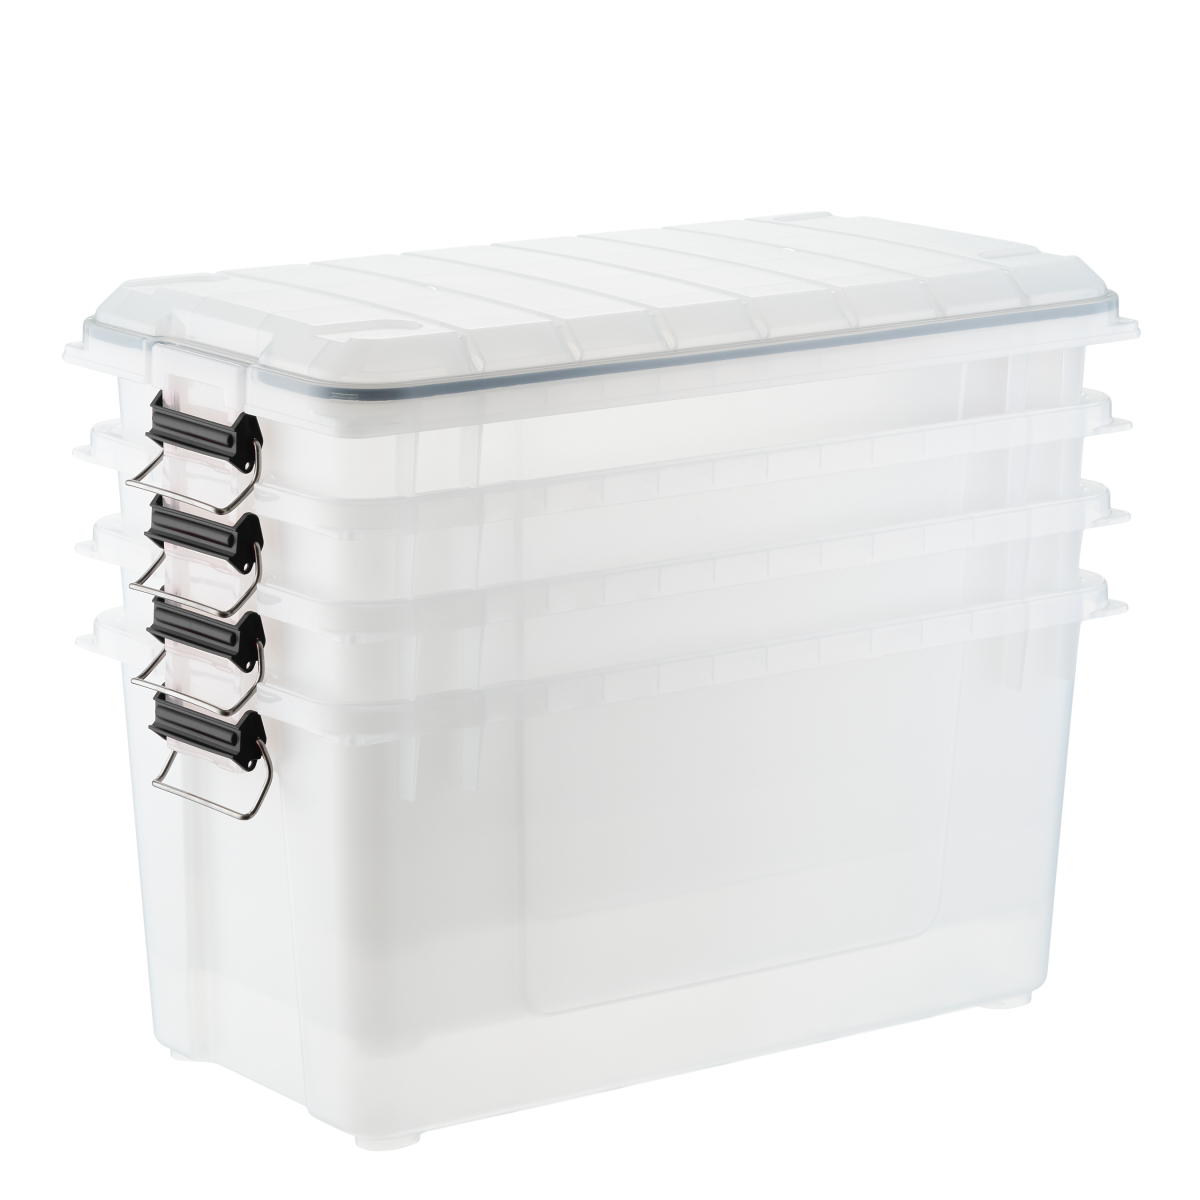 https://www.containerstore.com/catalogimages/433375/10065390-weathertight-trunk-20gal-ca.jpg